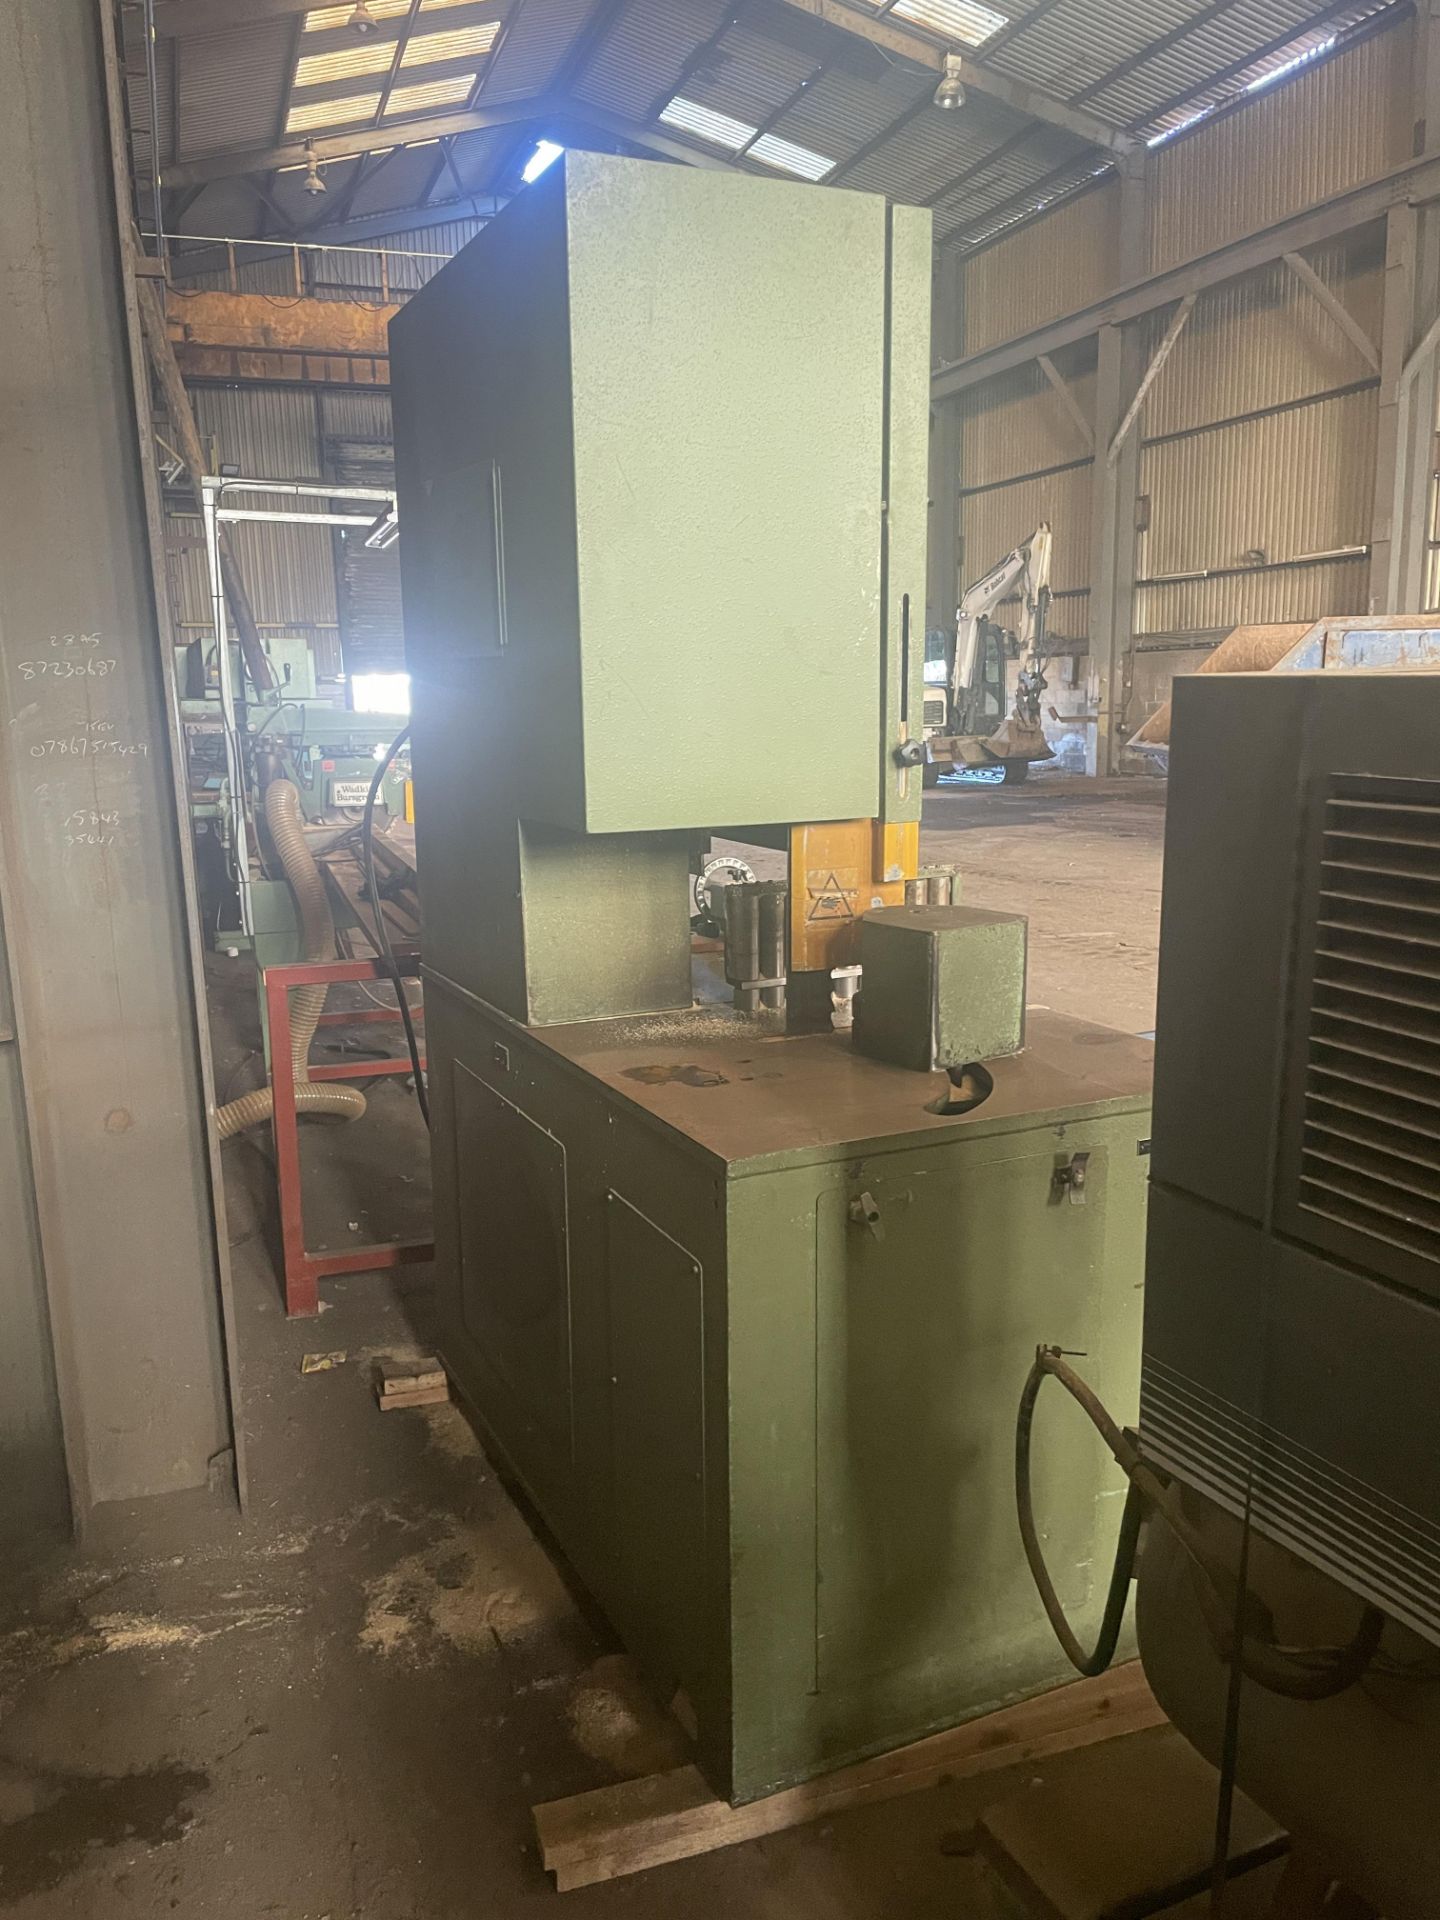 Stenner EAGLE 36 VERTICAL RESAW, serial no. 9387, lot located at Cochranes Wharf, Dockside Rd, - Bild 3 aus 8